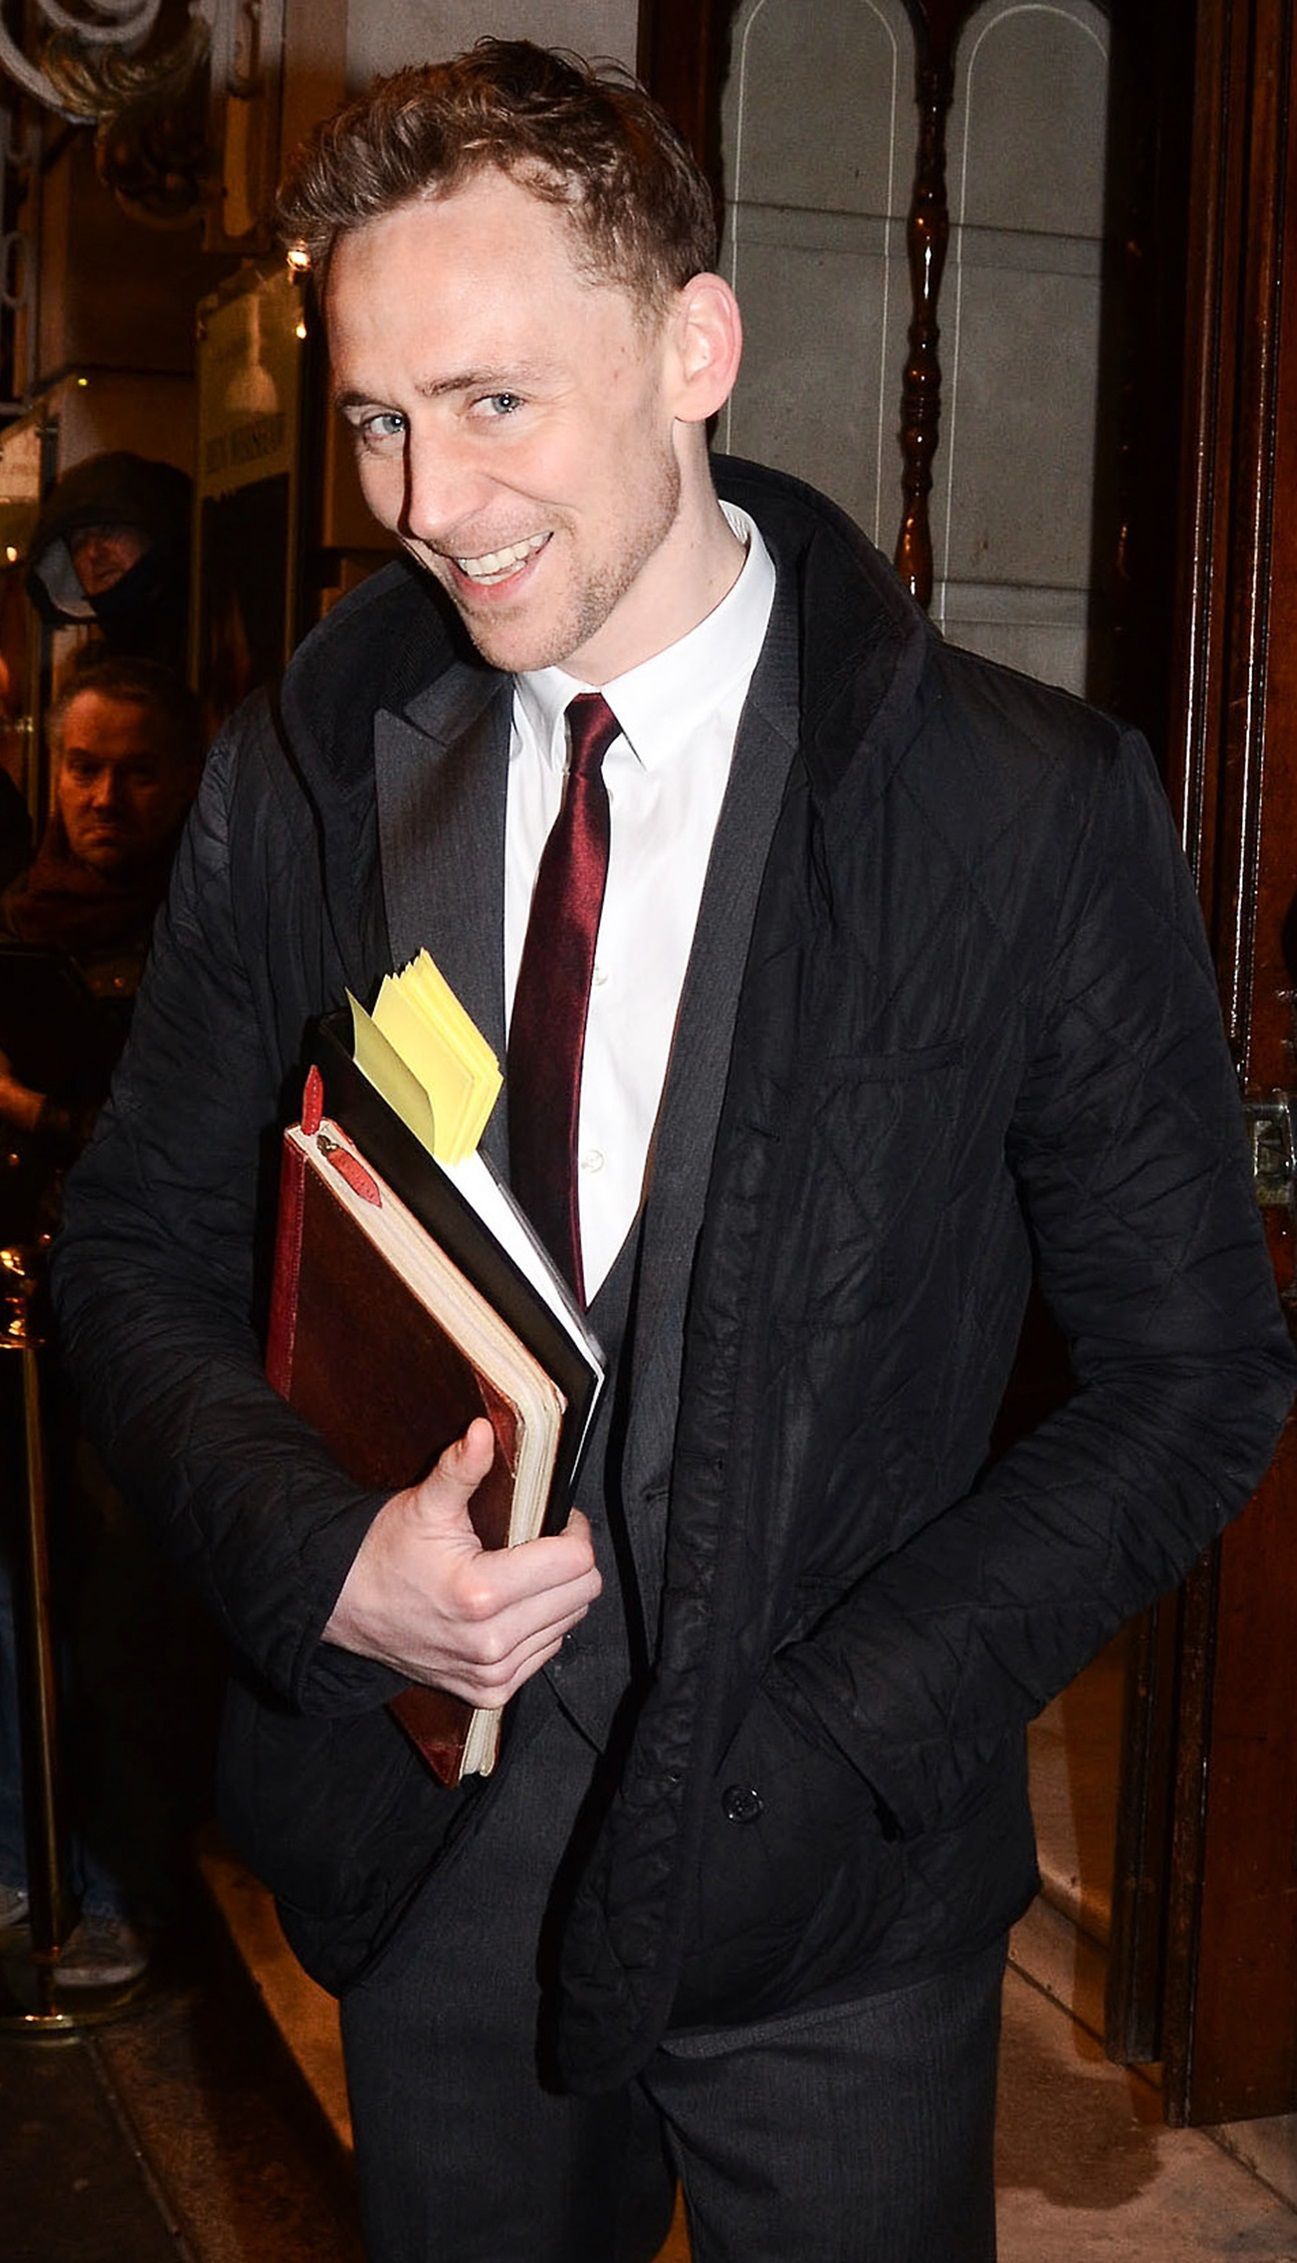 Tom Hiddleston – he looks mischievously adorable, maybe because he is hiding his